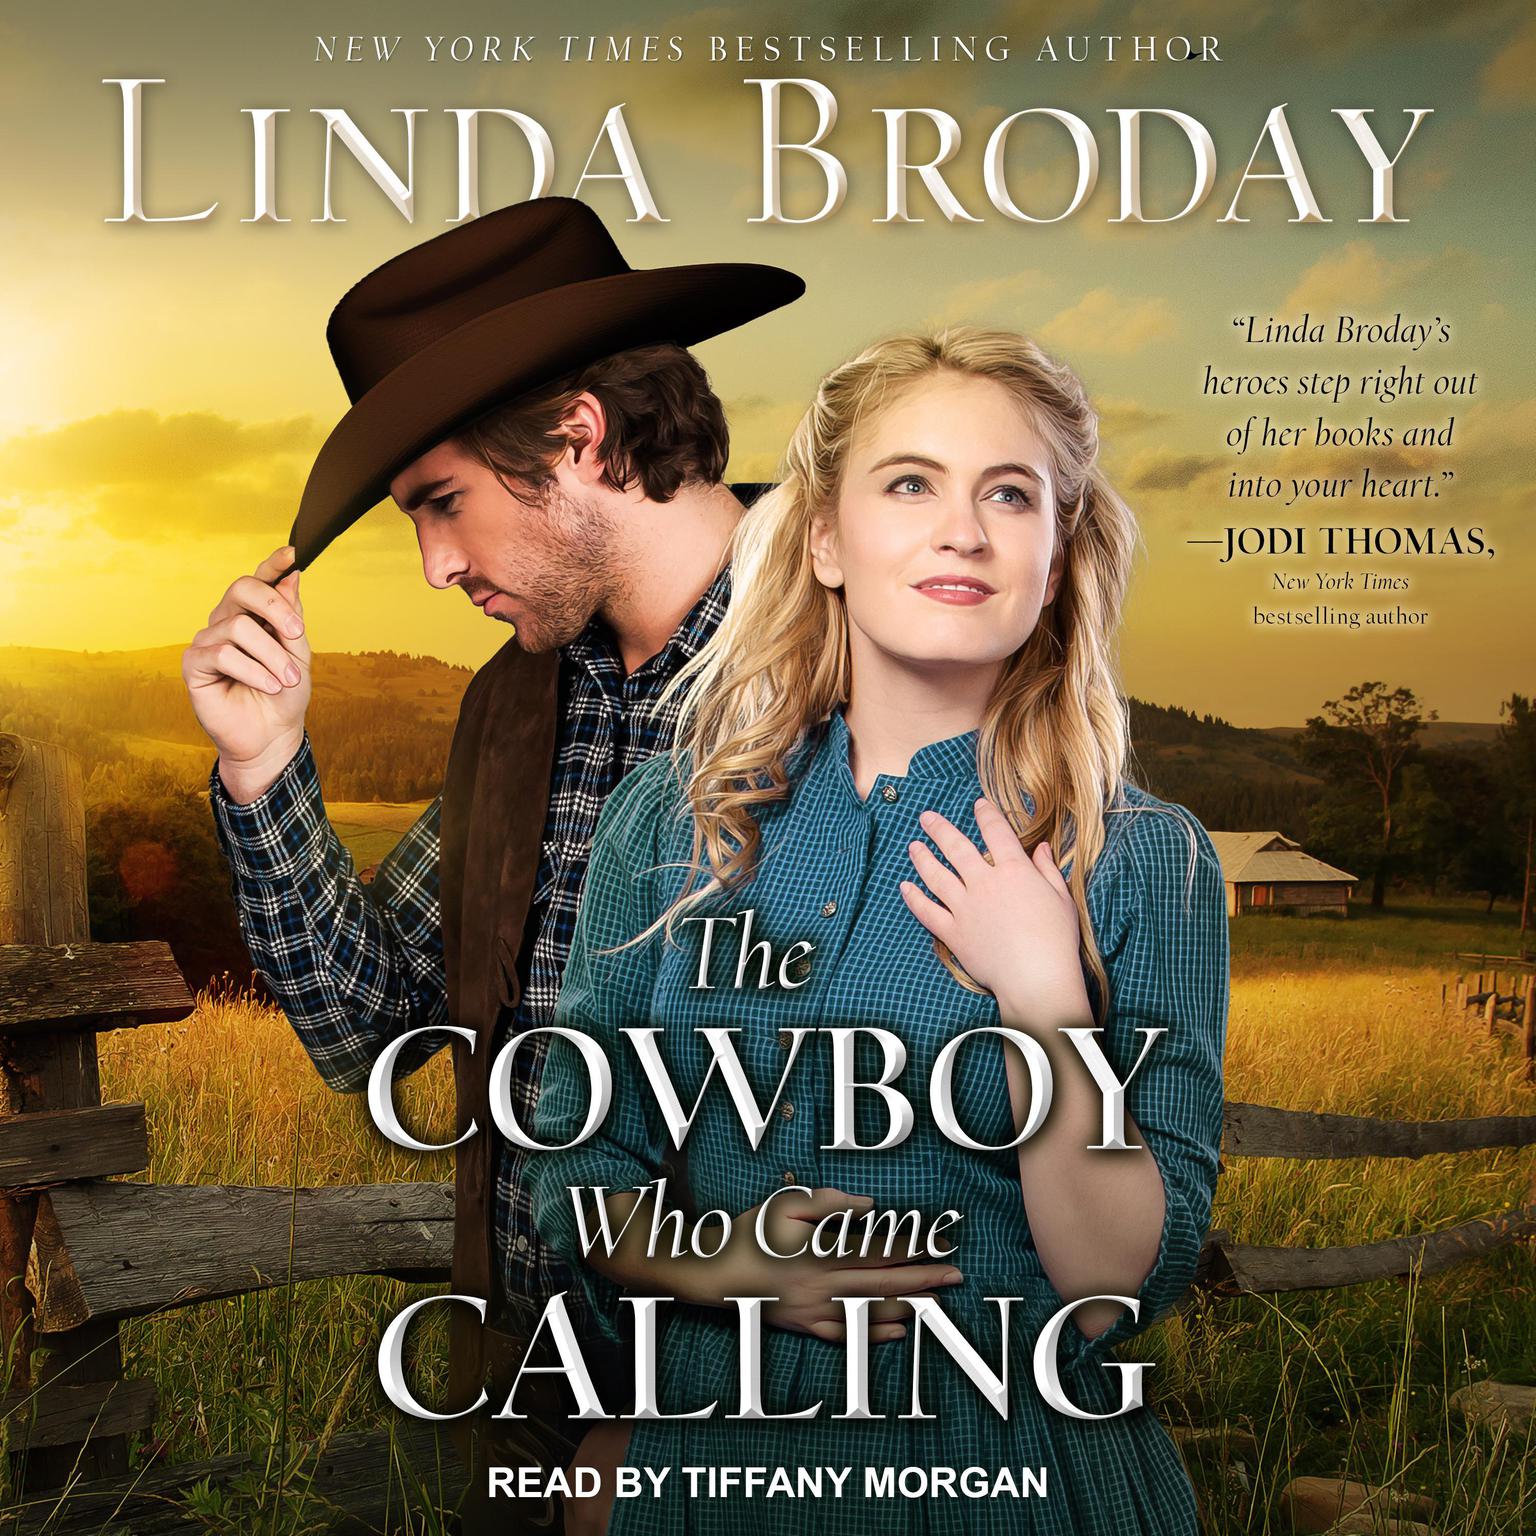 The Cowboy Who Came Calling Audiobook, by Linda Broday